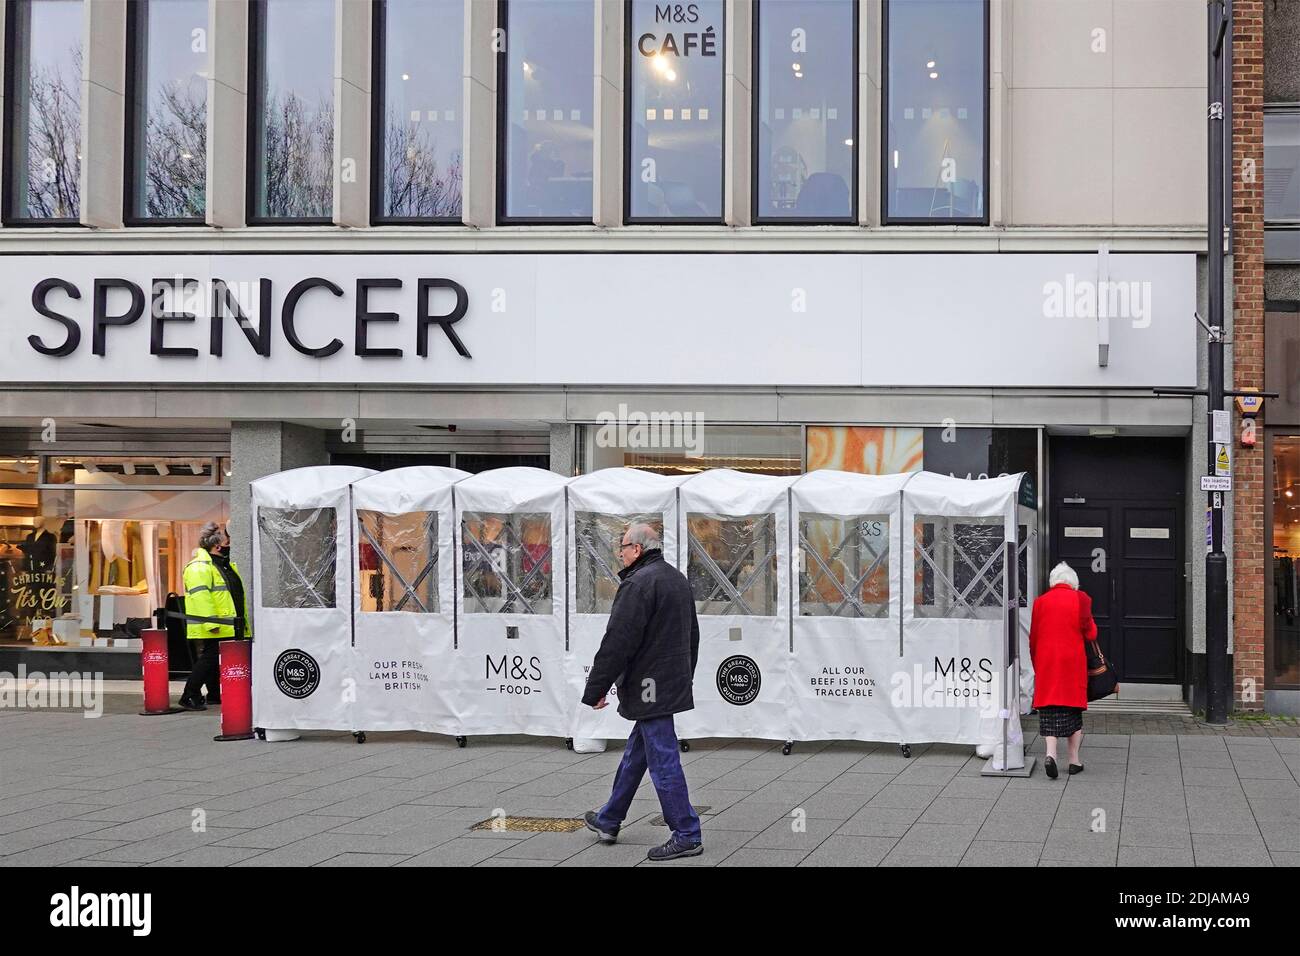 Marks and Spencer shop front & collapsible all weather shoppers shelter one way M&S store entrance control for coronavirus corvid 19 pandemic Essex uk Stock Photo